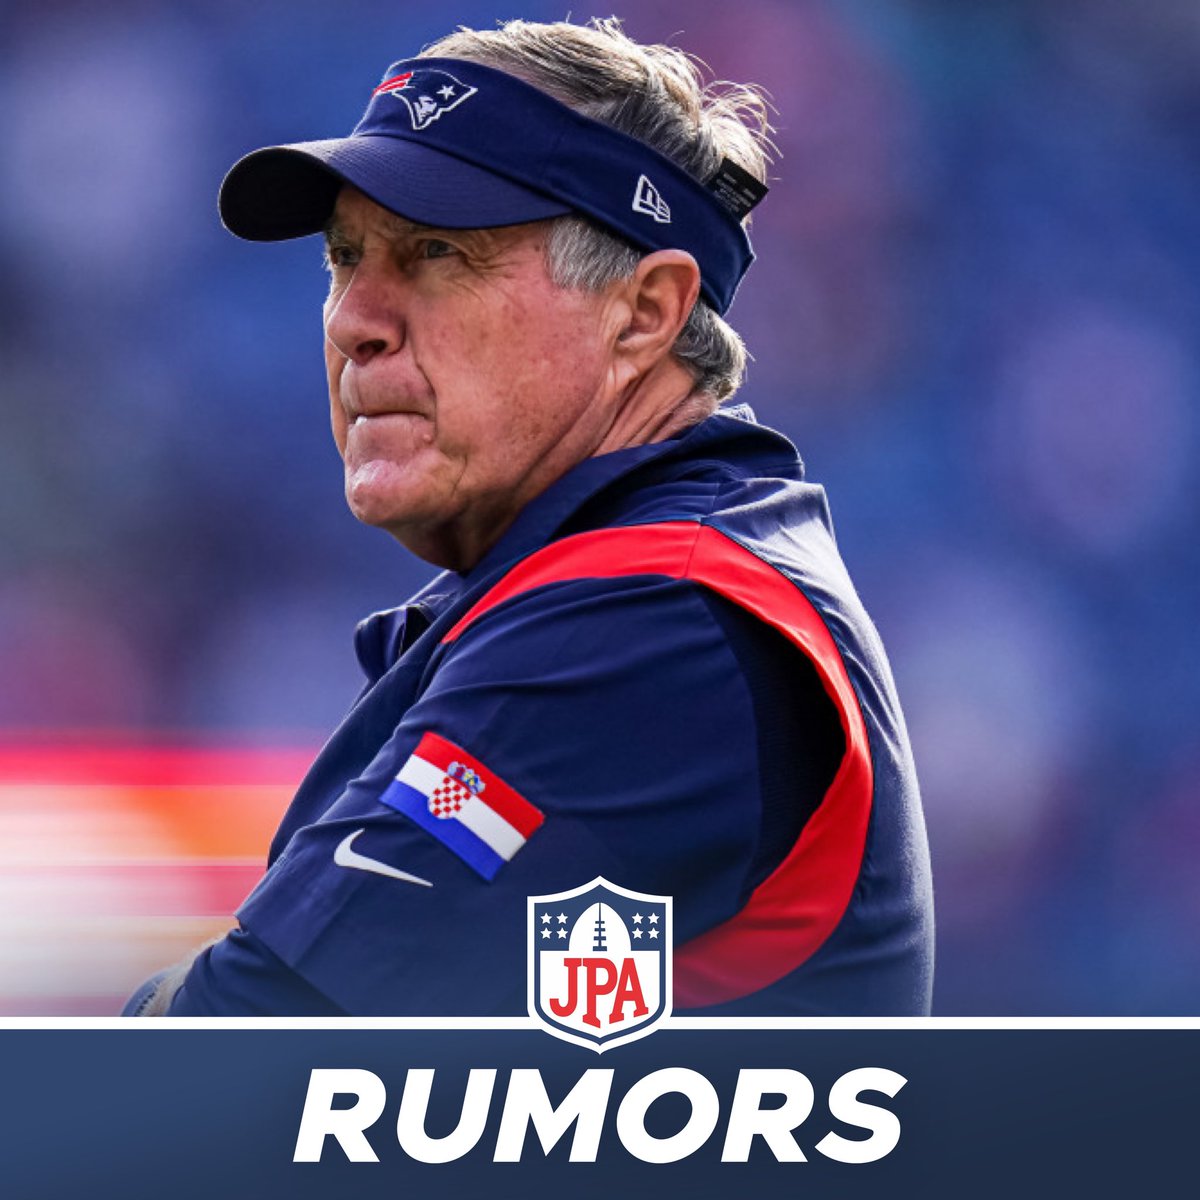 𝗥𝗨𝗠𝗢𝗥𝗦: The #Patriots already decided that they would be moving on from Bill Belichick at the end of the season after their loss to the #Colts in Germany earlier this year, a source told  @tomecurran 

“When they came out of the loss in Germany, conversations I had that